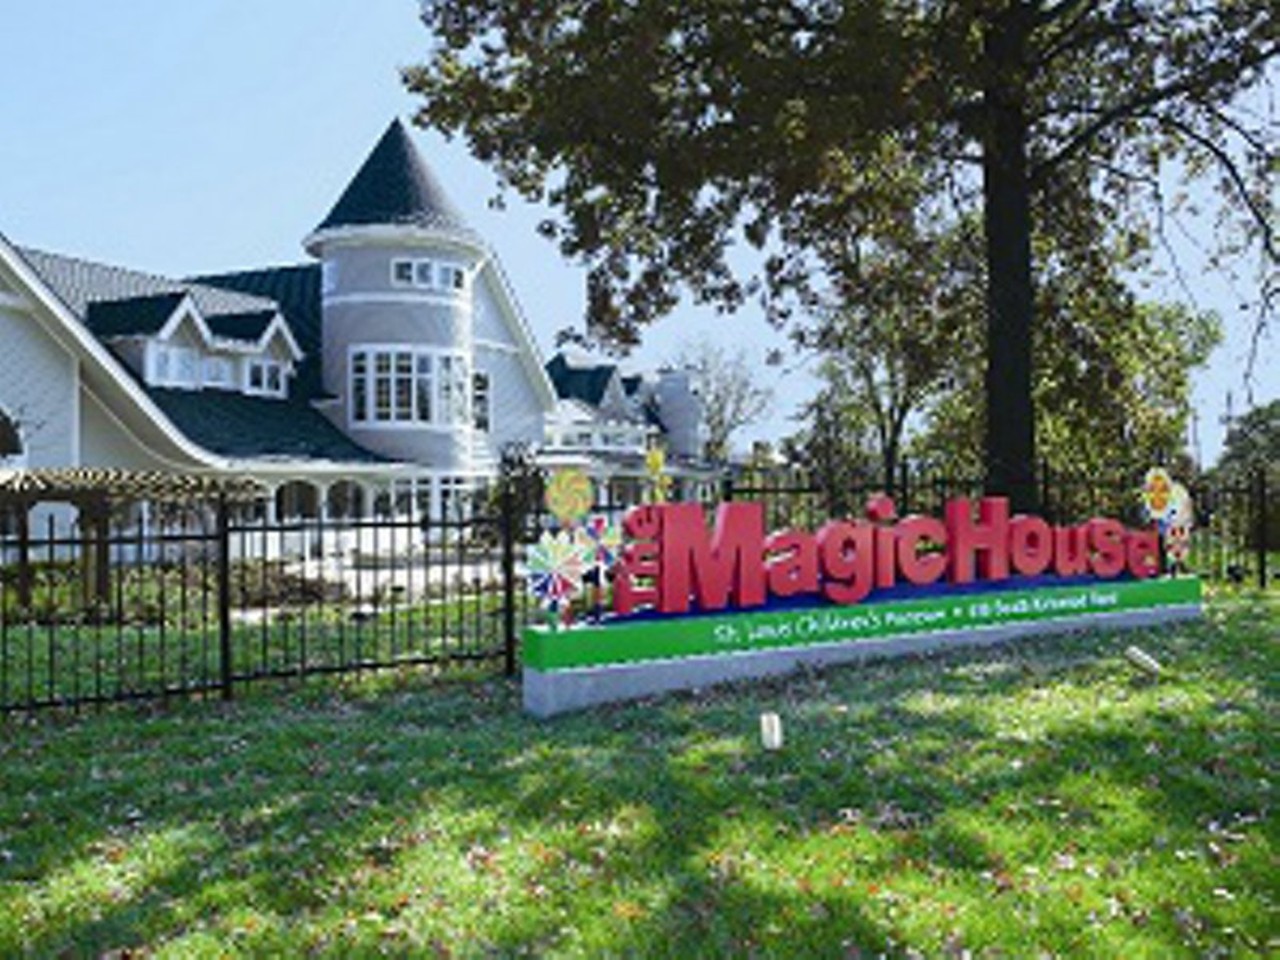 Magical Nights
(516 S Kirkwood Road, 314-822-8900)
The Magic House is offering a &#147;twinkling light display&#148; you can walk through on certain nights — December 8, December 11, December 18 through 22 — along with Storytime with Mrs. Claus and a S&#146;mores experience. Find out more here.